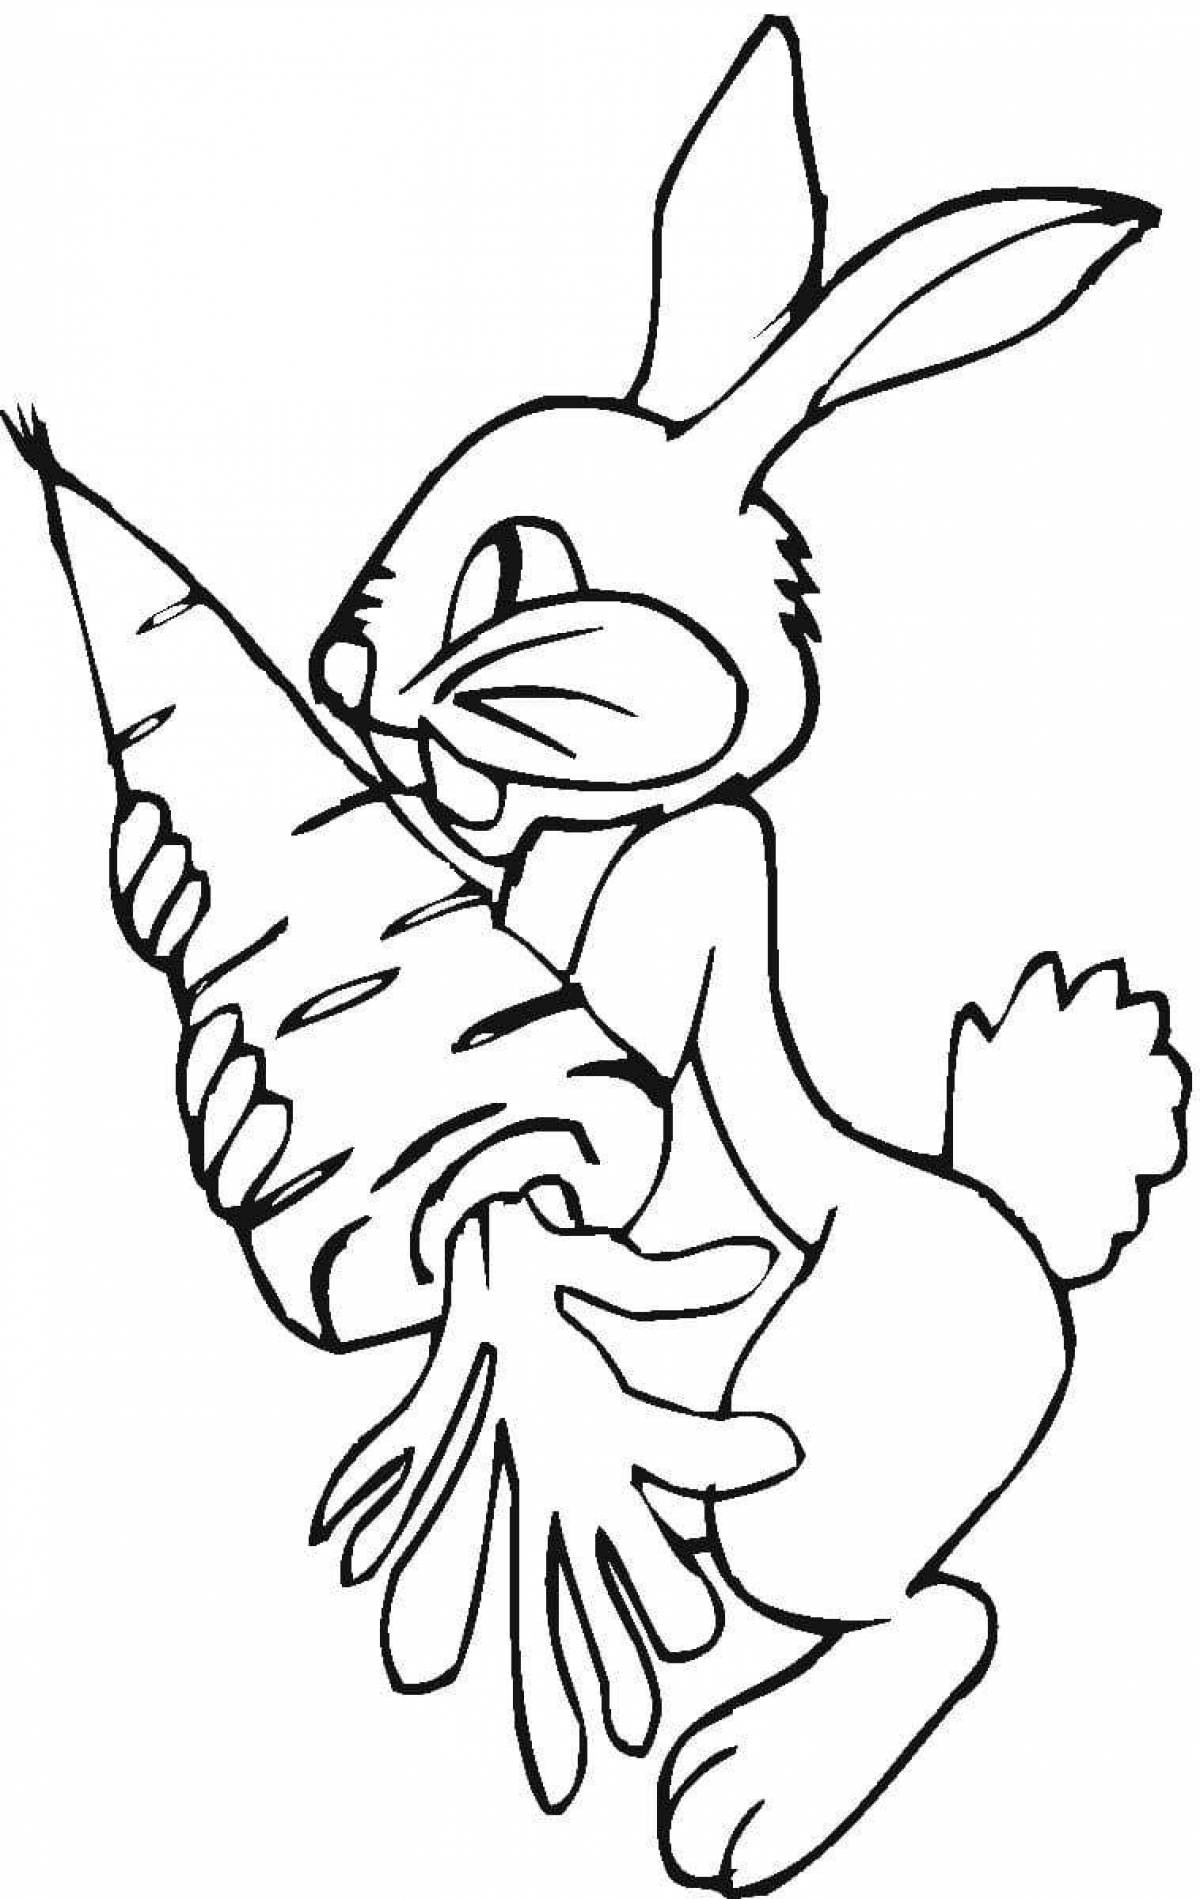 Coloring page adorable rabbit with carrots